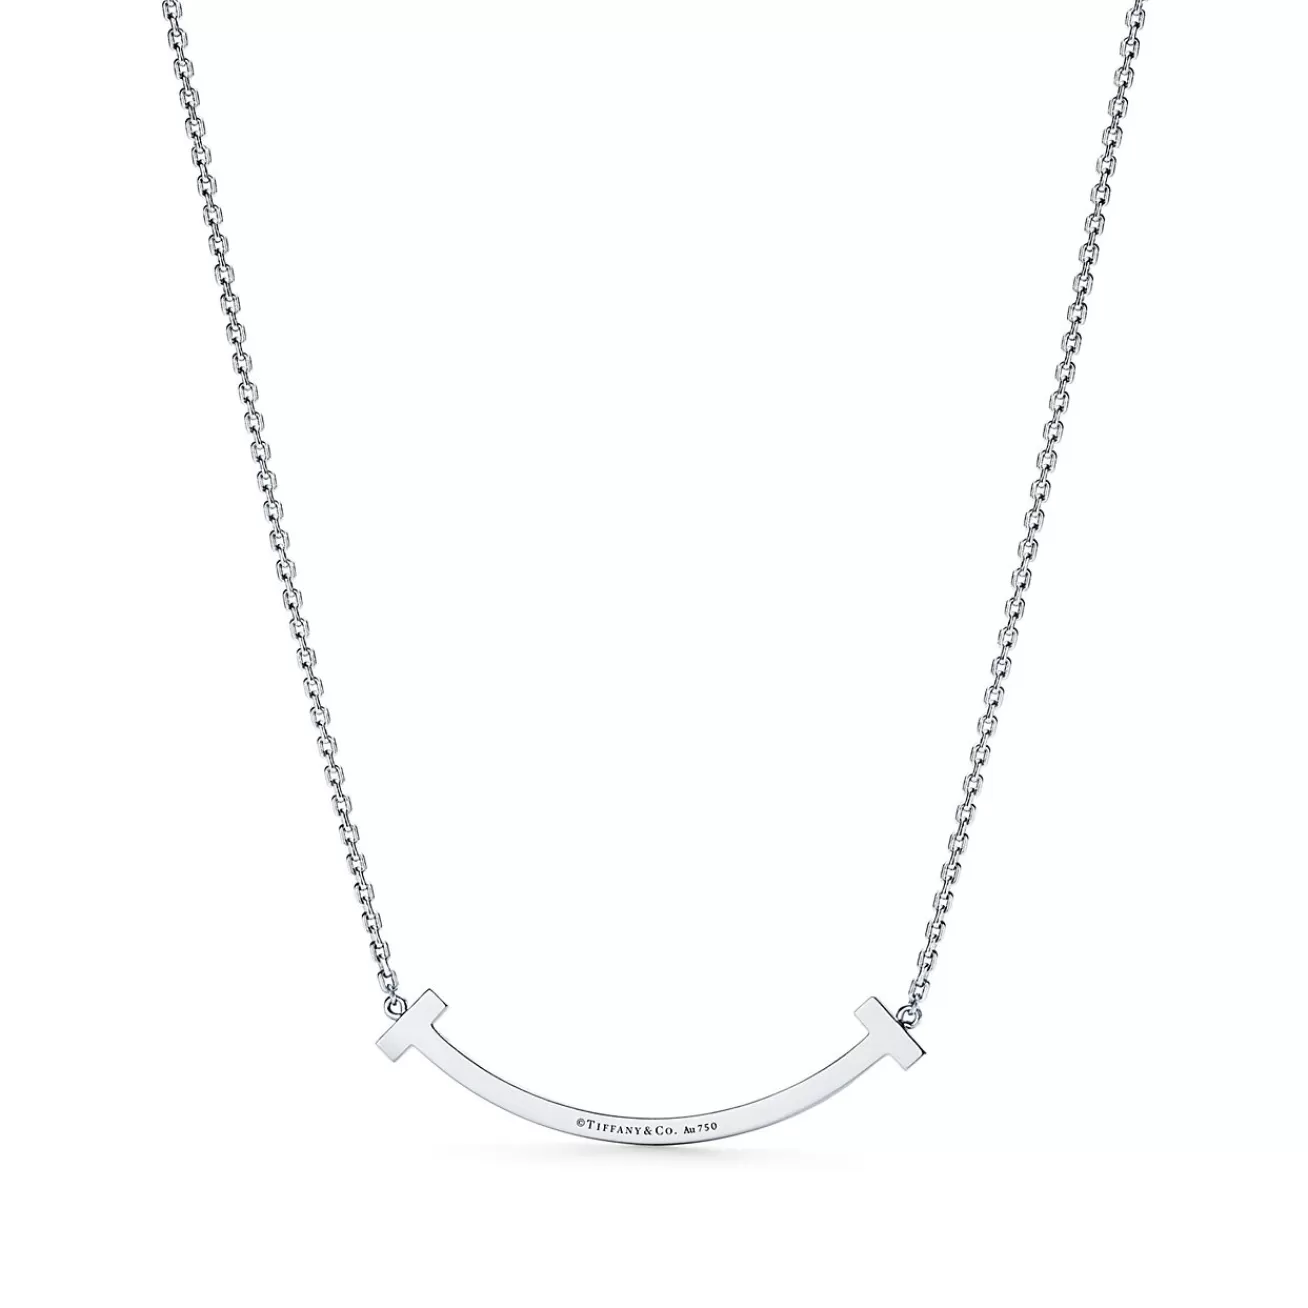 Tiffany & Co. Tiffany T medium smile pendant in 18k white gold with diamonds. | ^ Necklaces & Pendants | Gifts for Her